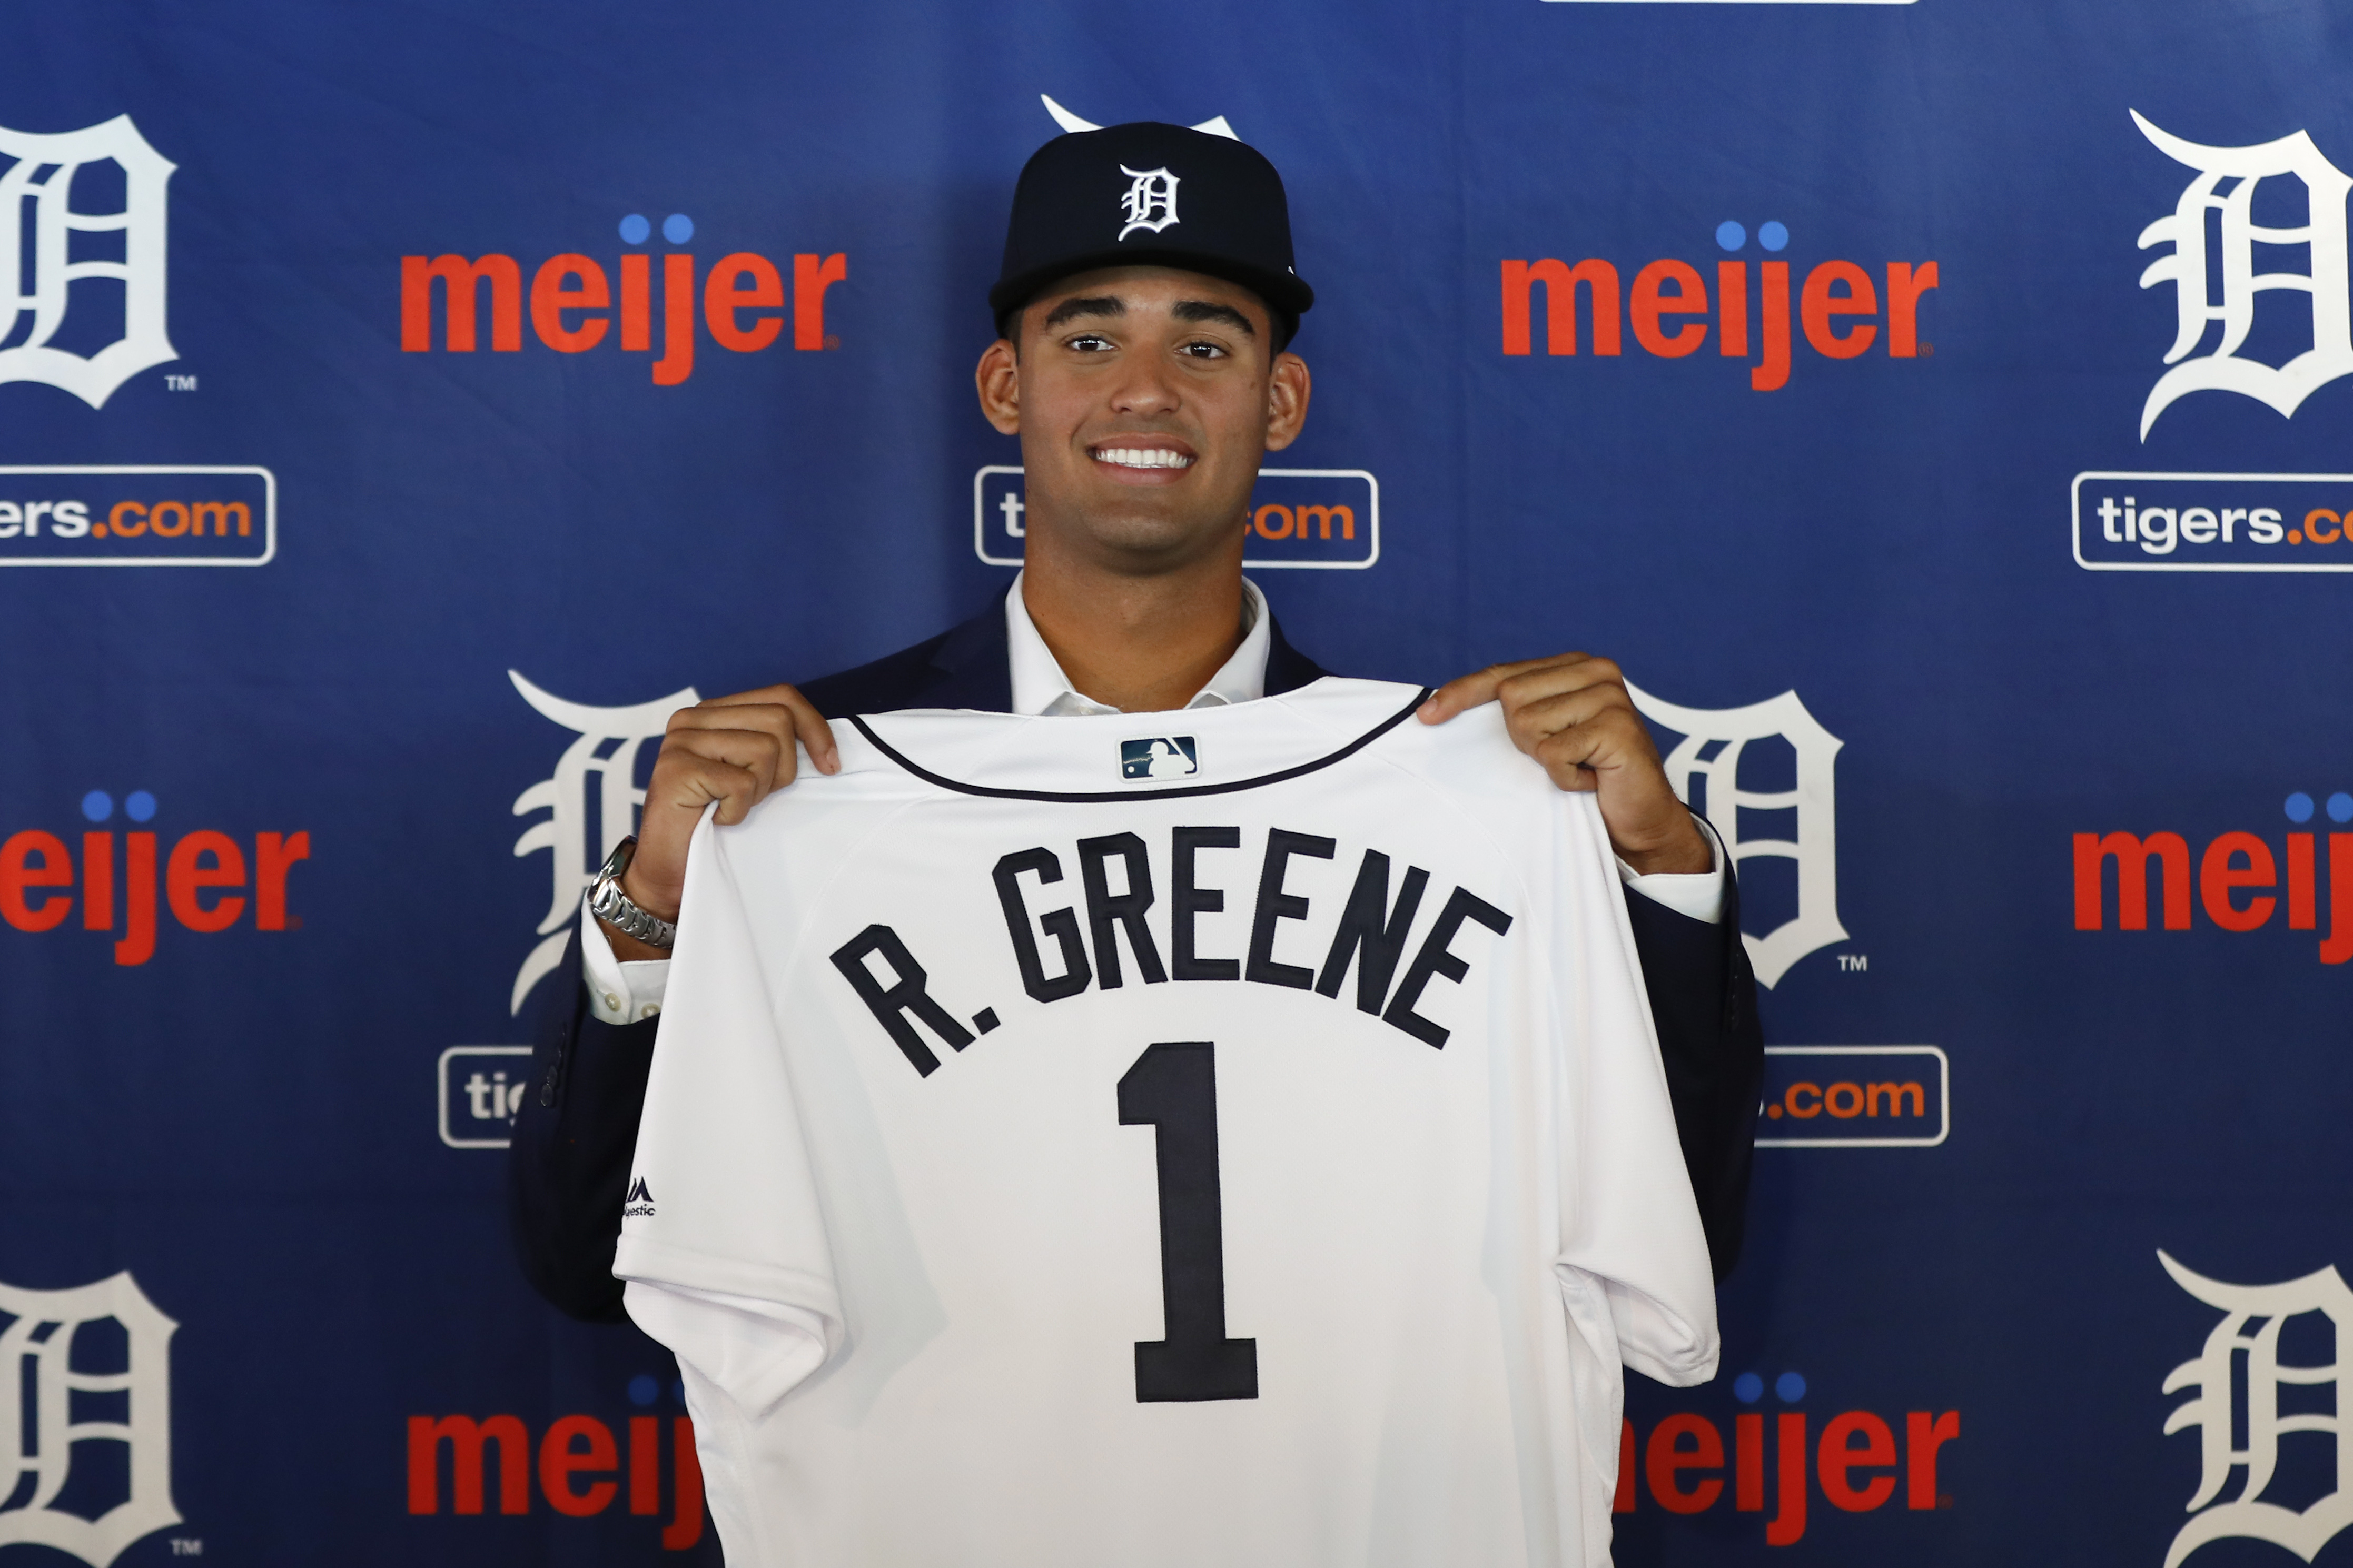 The Detroit Tigers have a choice: Round out the 2020 starting